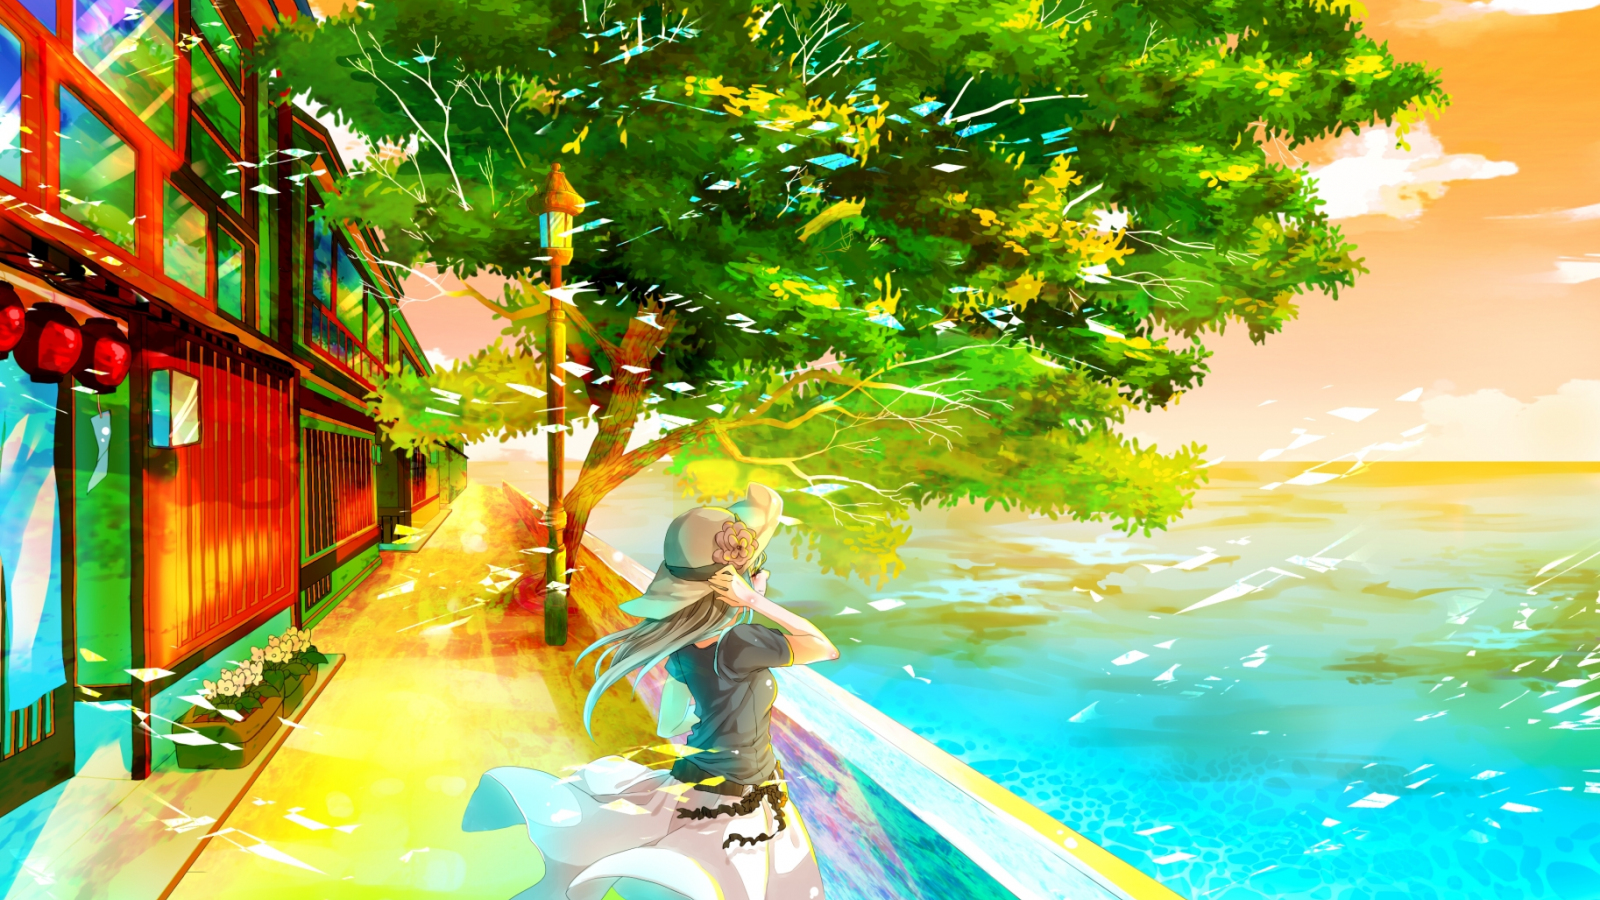 Summer Tree Anime Wallpapers - Wallpaper Cave